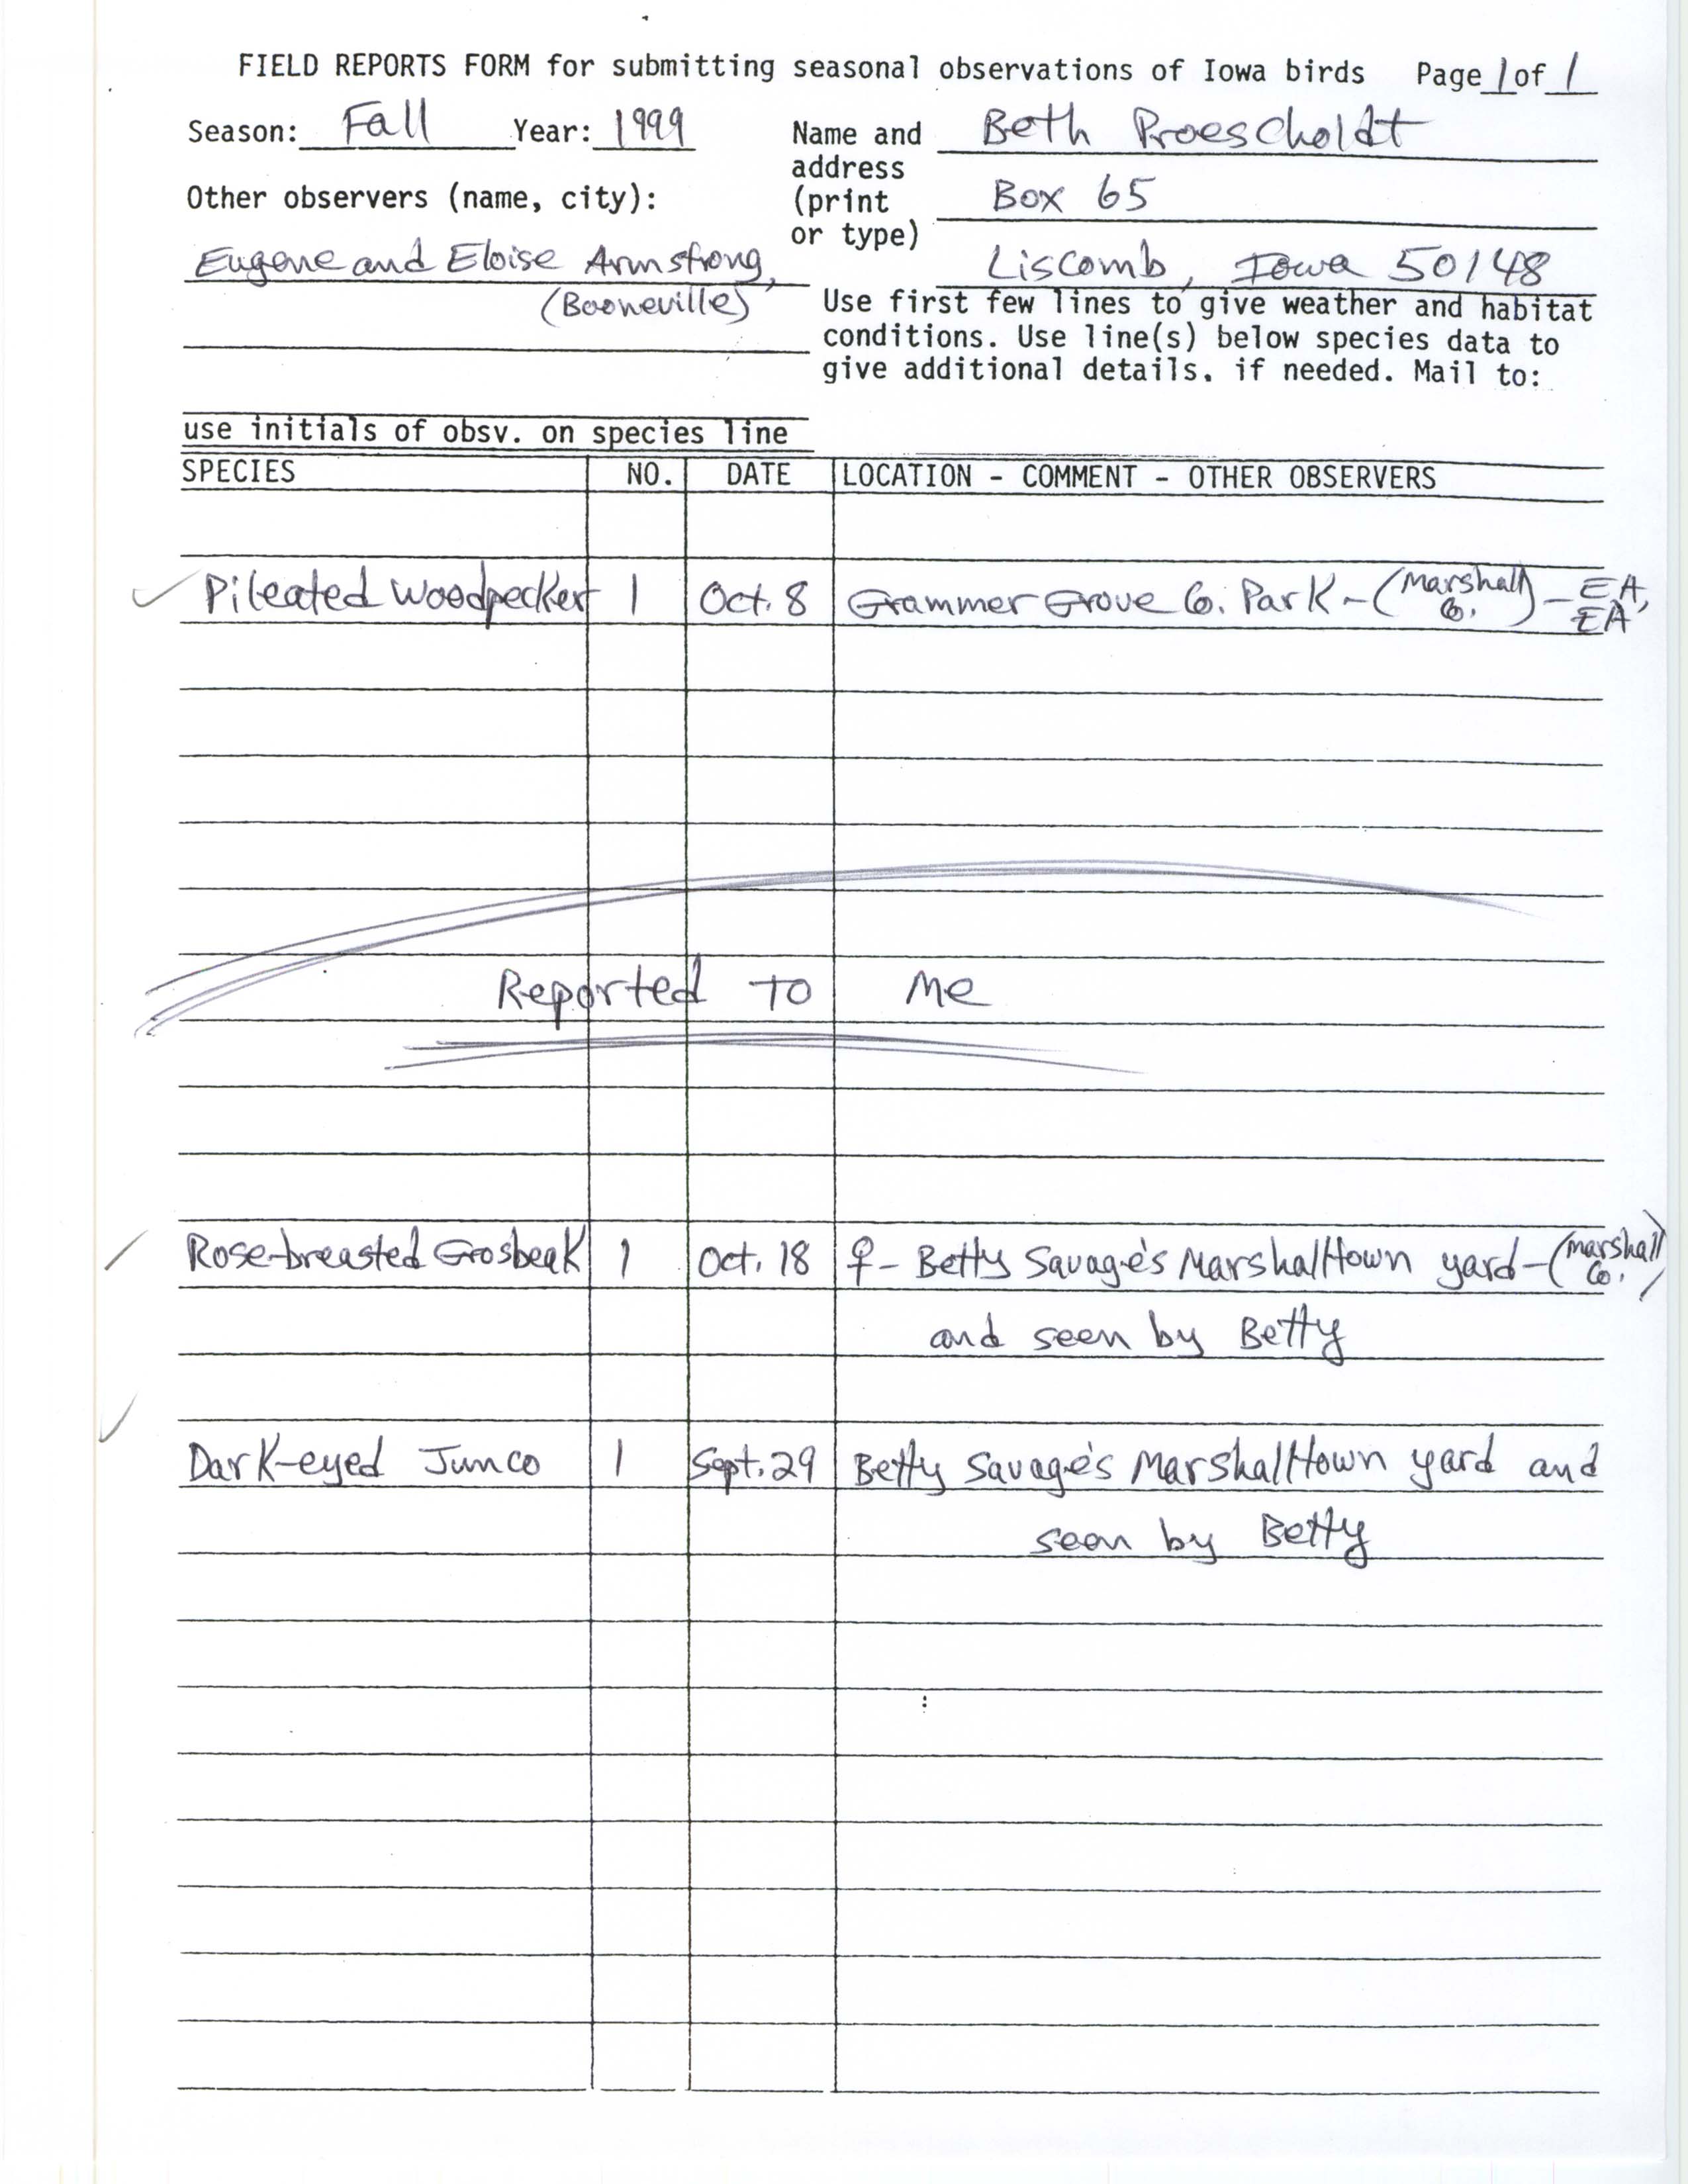 Field reports form for submitting seasonal observations of Iowa birds, fall 1999, Beth Proescholdt